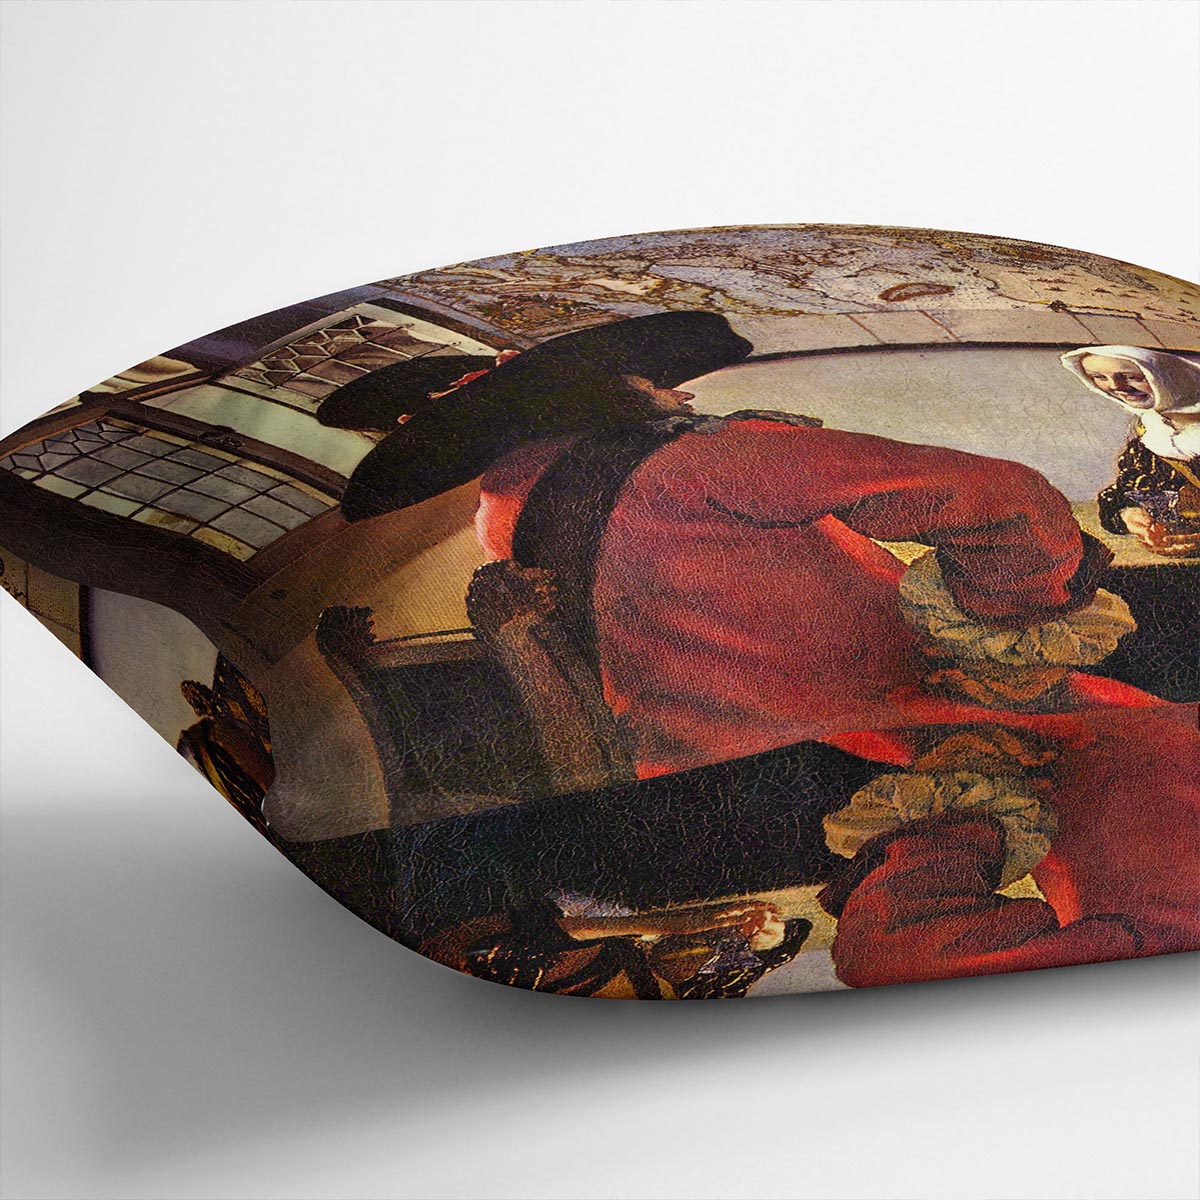 Soldier and girl smiling by Vermeer Cushion